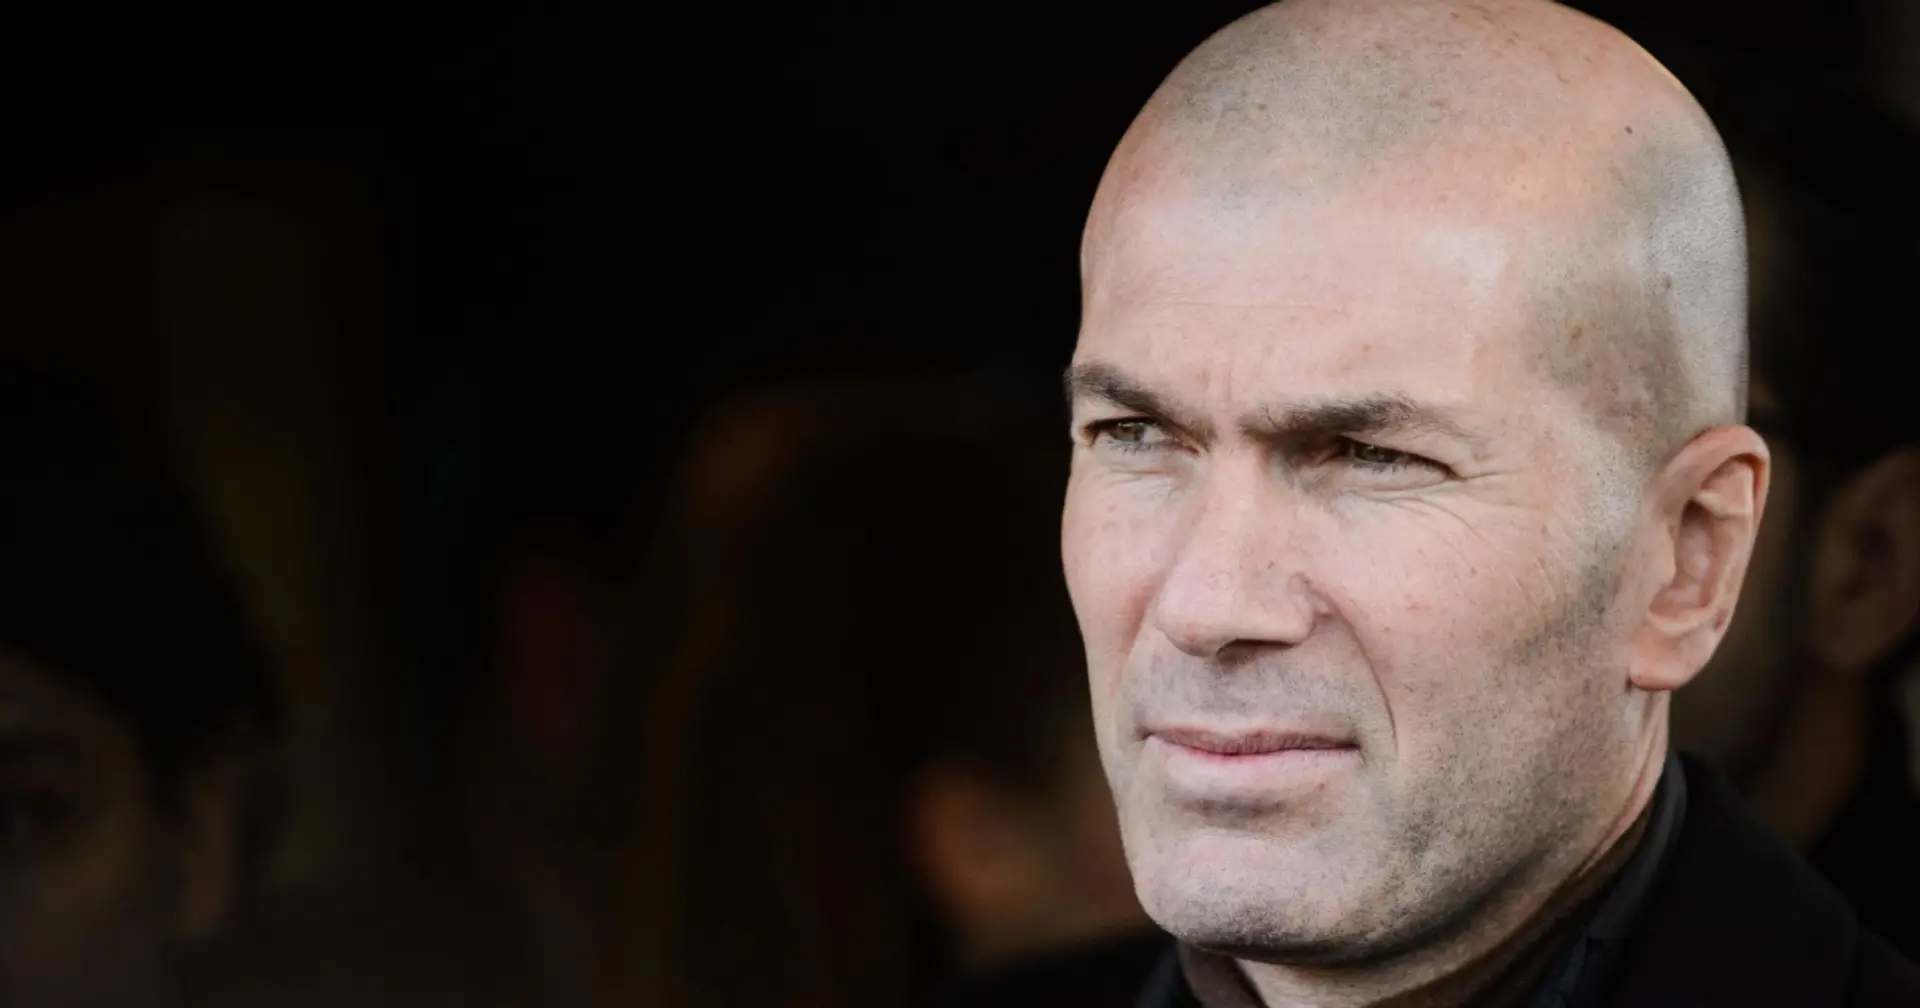 Zidane rejects offer to coach Cristiano Ronaldo again despite €150 million in two years